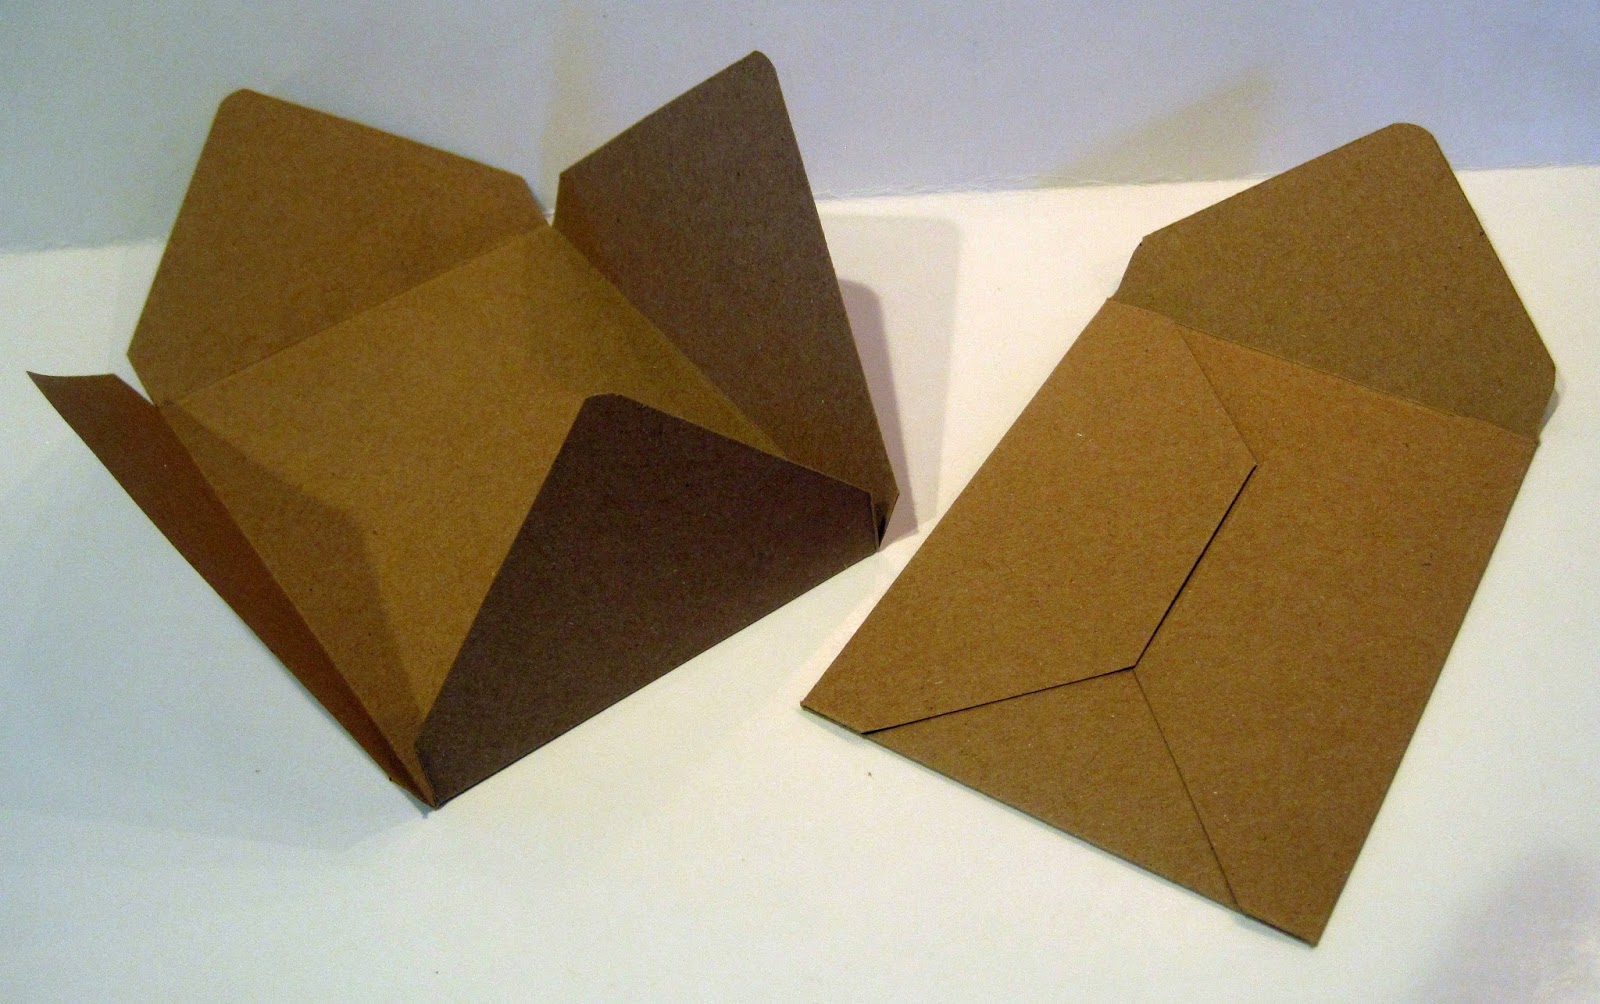 How to Make a Simple Paper Seed Envelope (packet) 